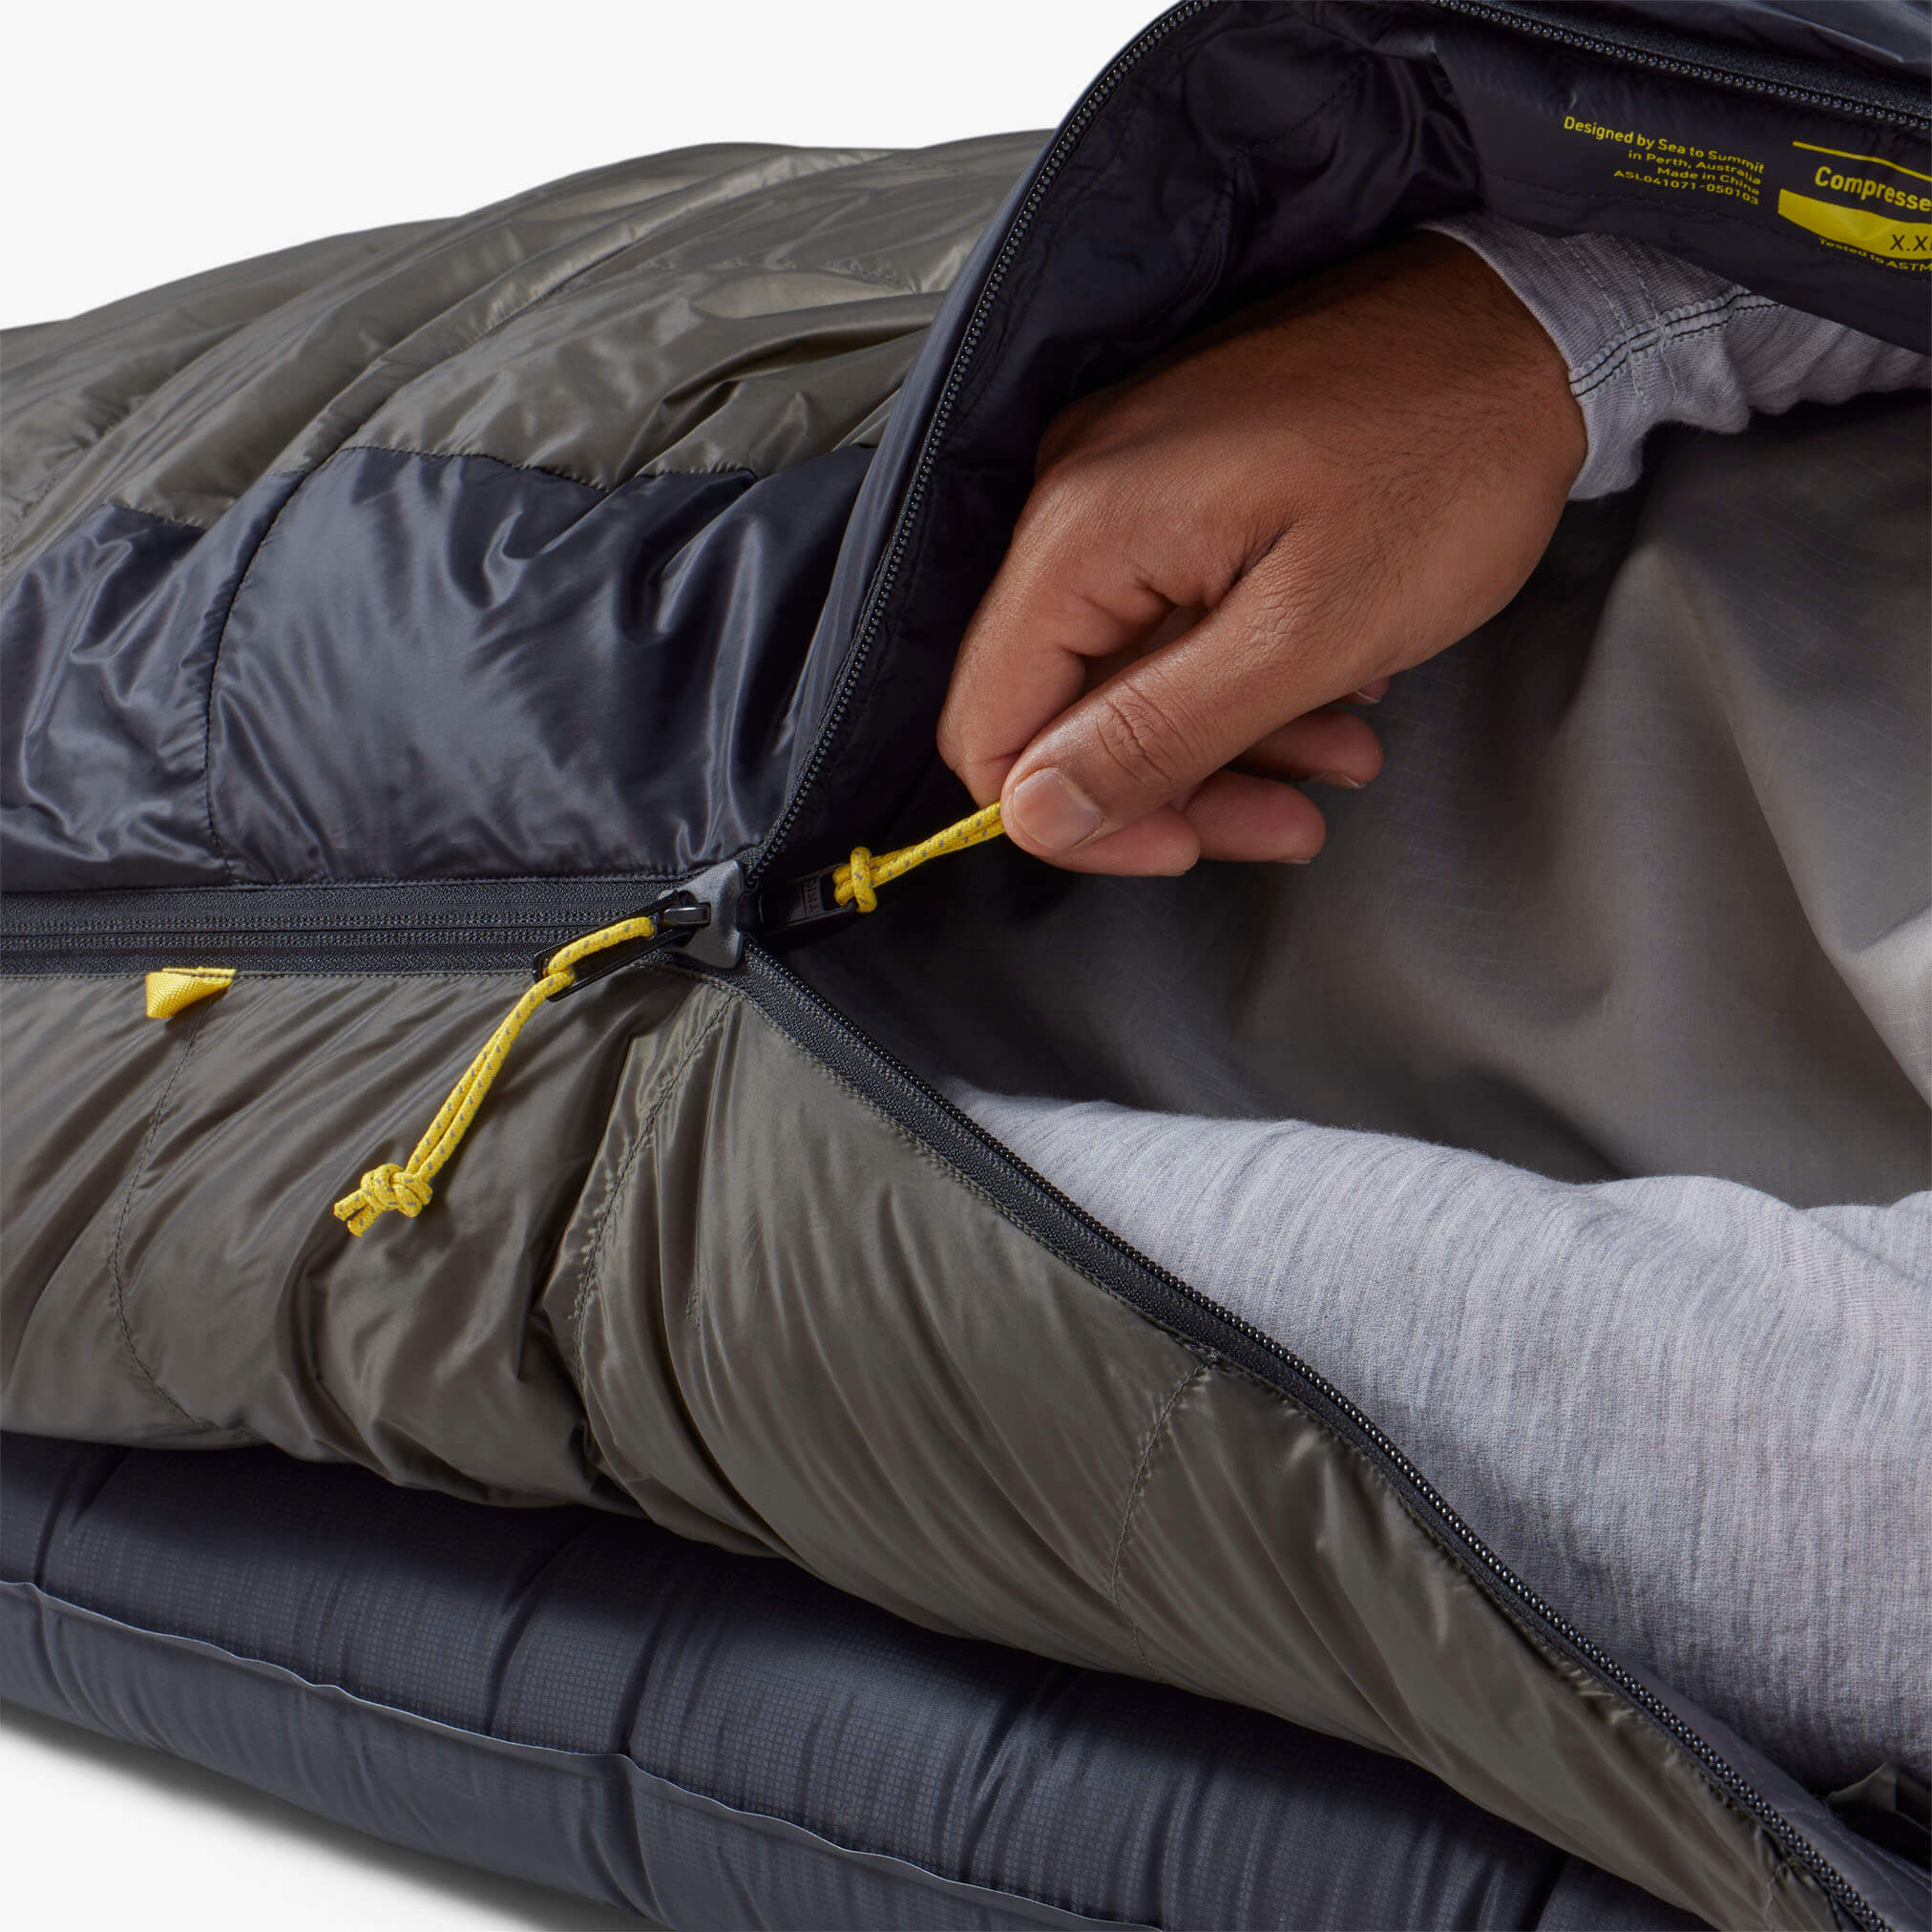 Sea to Summit Spark Pro -9C Down Sleeping Bag RDS